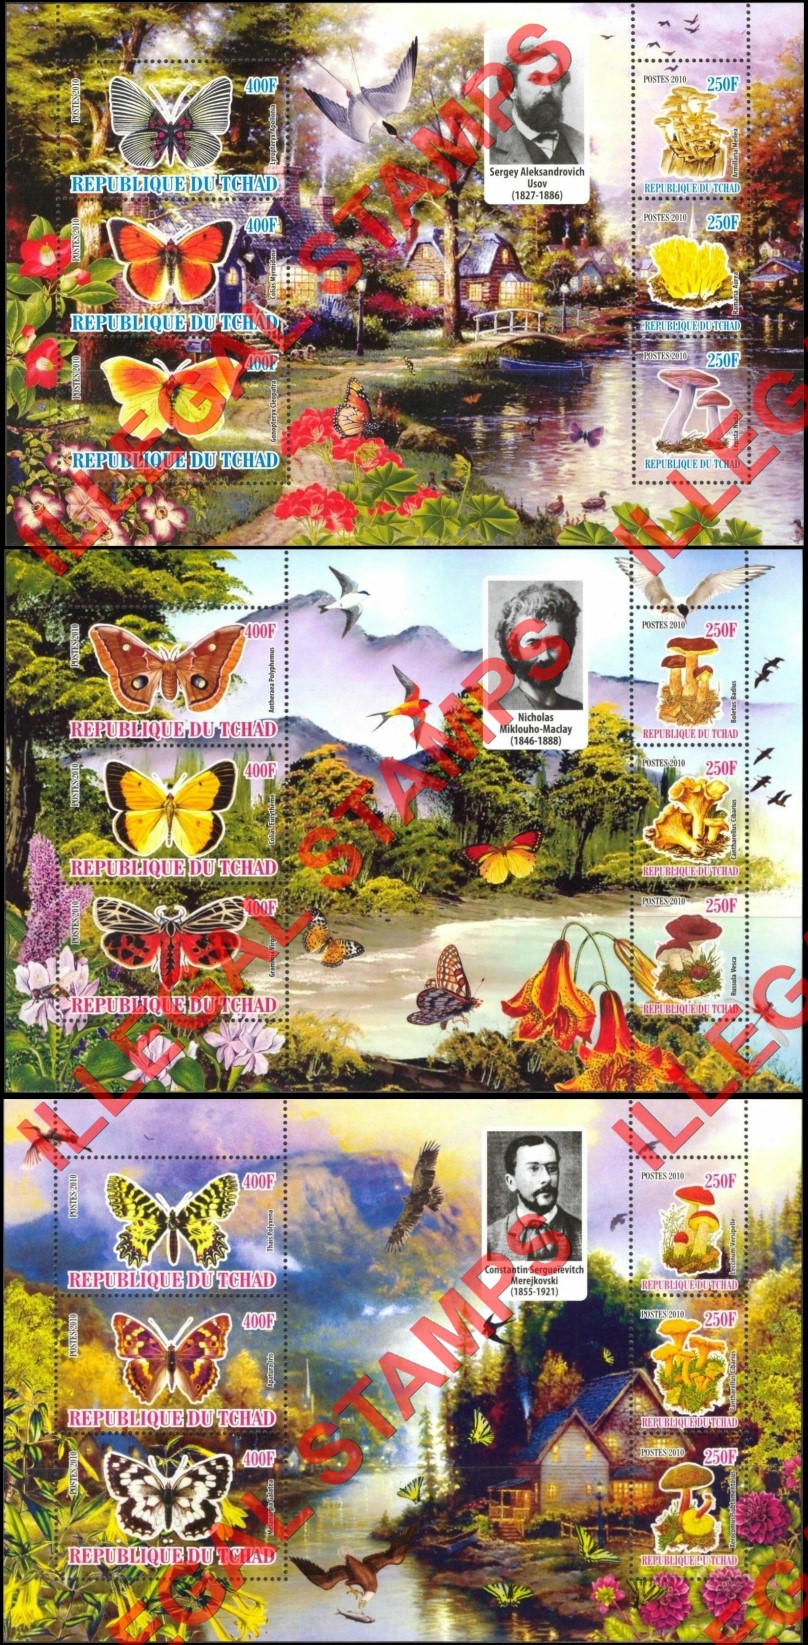 Chad 2010 Butterflies and Mushrooms Illegal Stamps in Souvenir Sheets of 6 (Part 4)